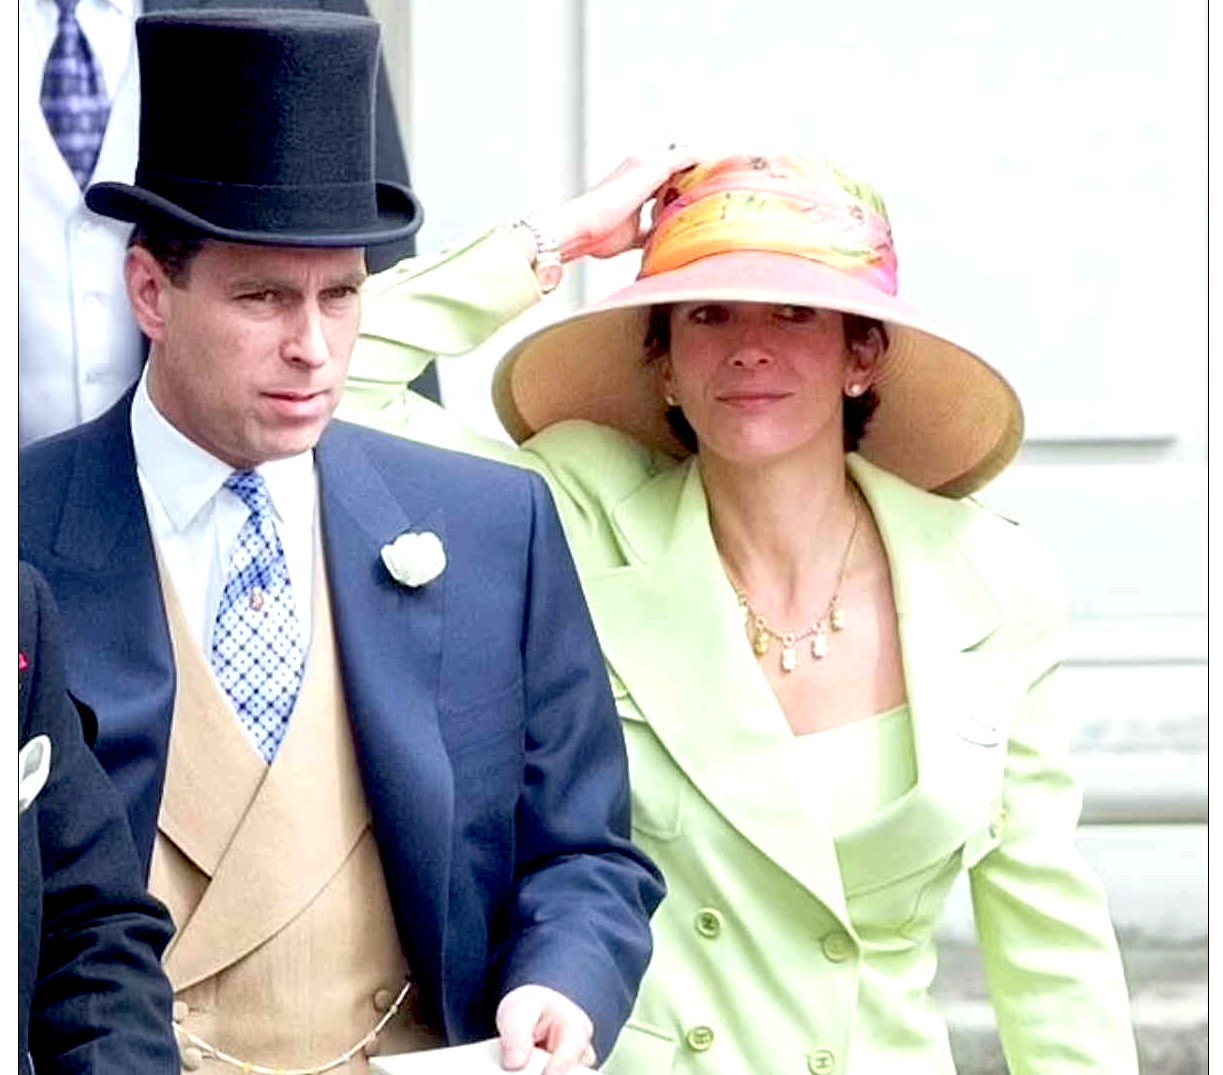 Prince Andrew, Duke of York and Ghislaine Maxwell at Ascot